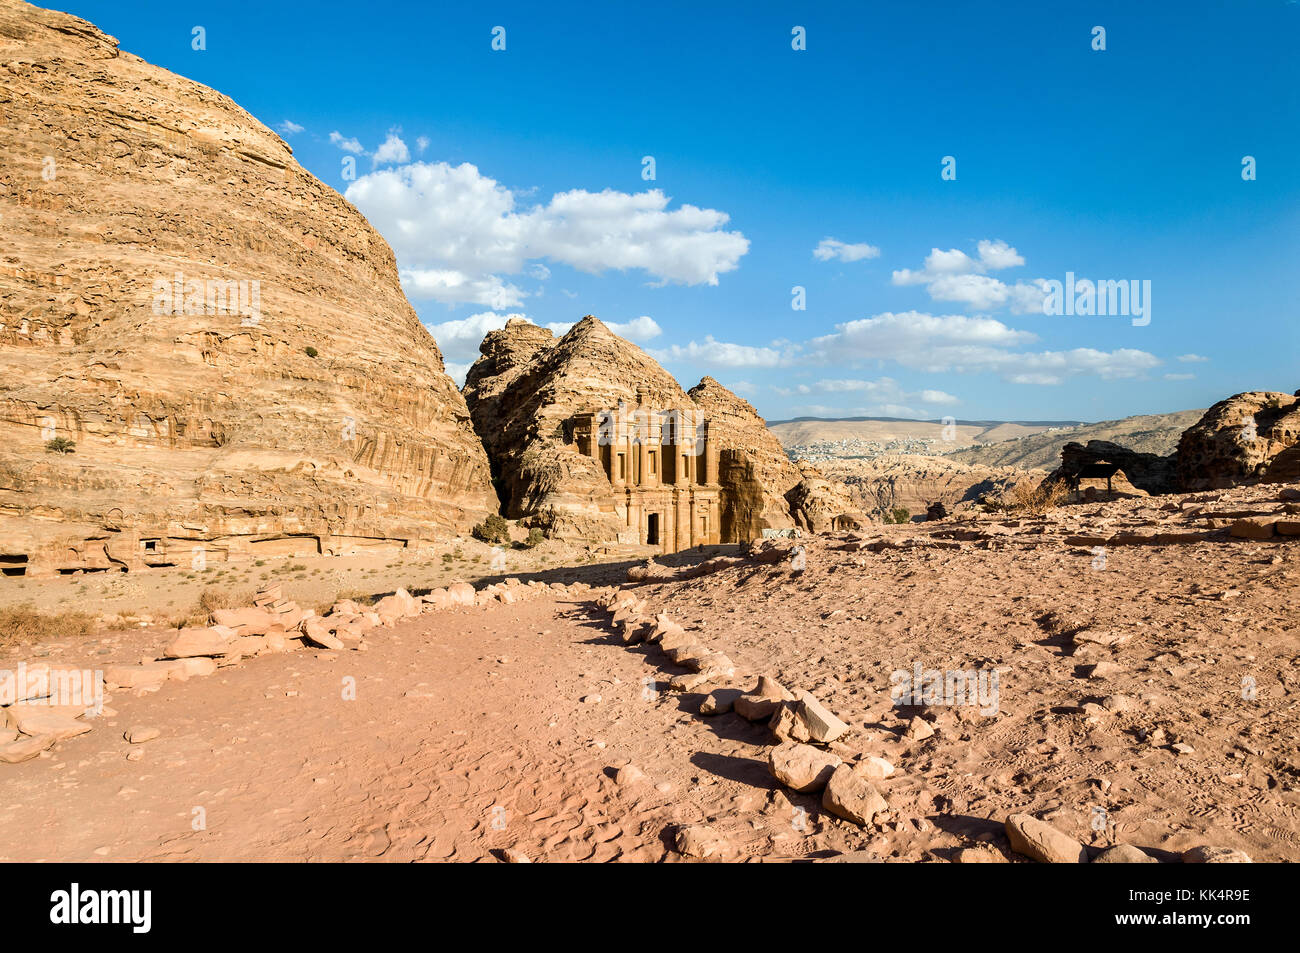 Landscape with side view of the Monastery (Ad Deir or El Deir) the monumental building carved out of rock in the ancient Nabataean city of Petra Stock Photo